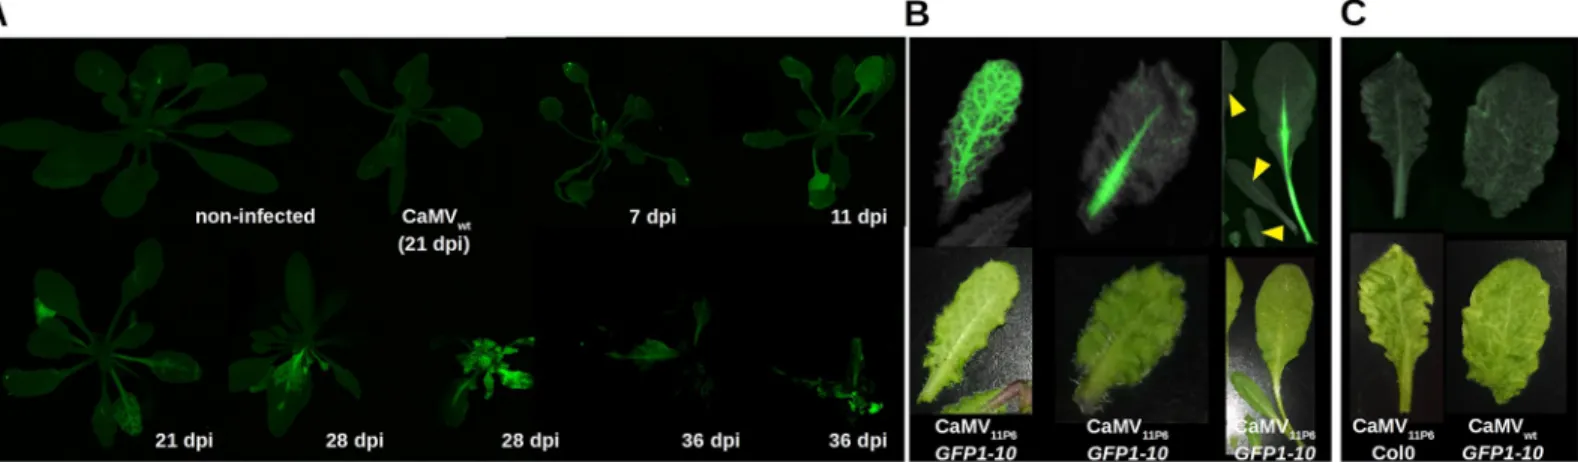 Fig 4. Visualization of 11P6 in CaMV 11P6 -infected A. thaliana GFP1-10 plants. (A) GFP1-10 plants were mechanically inoculated at different times with CaMV 11P6